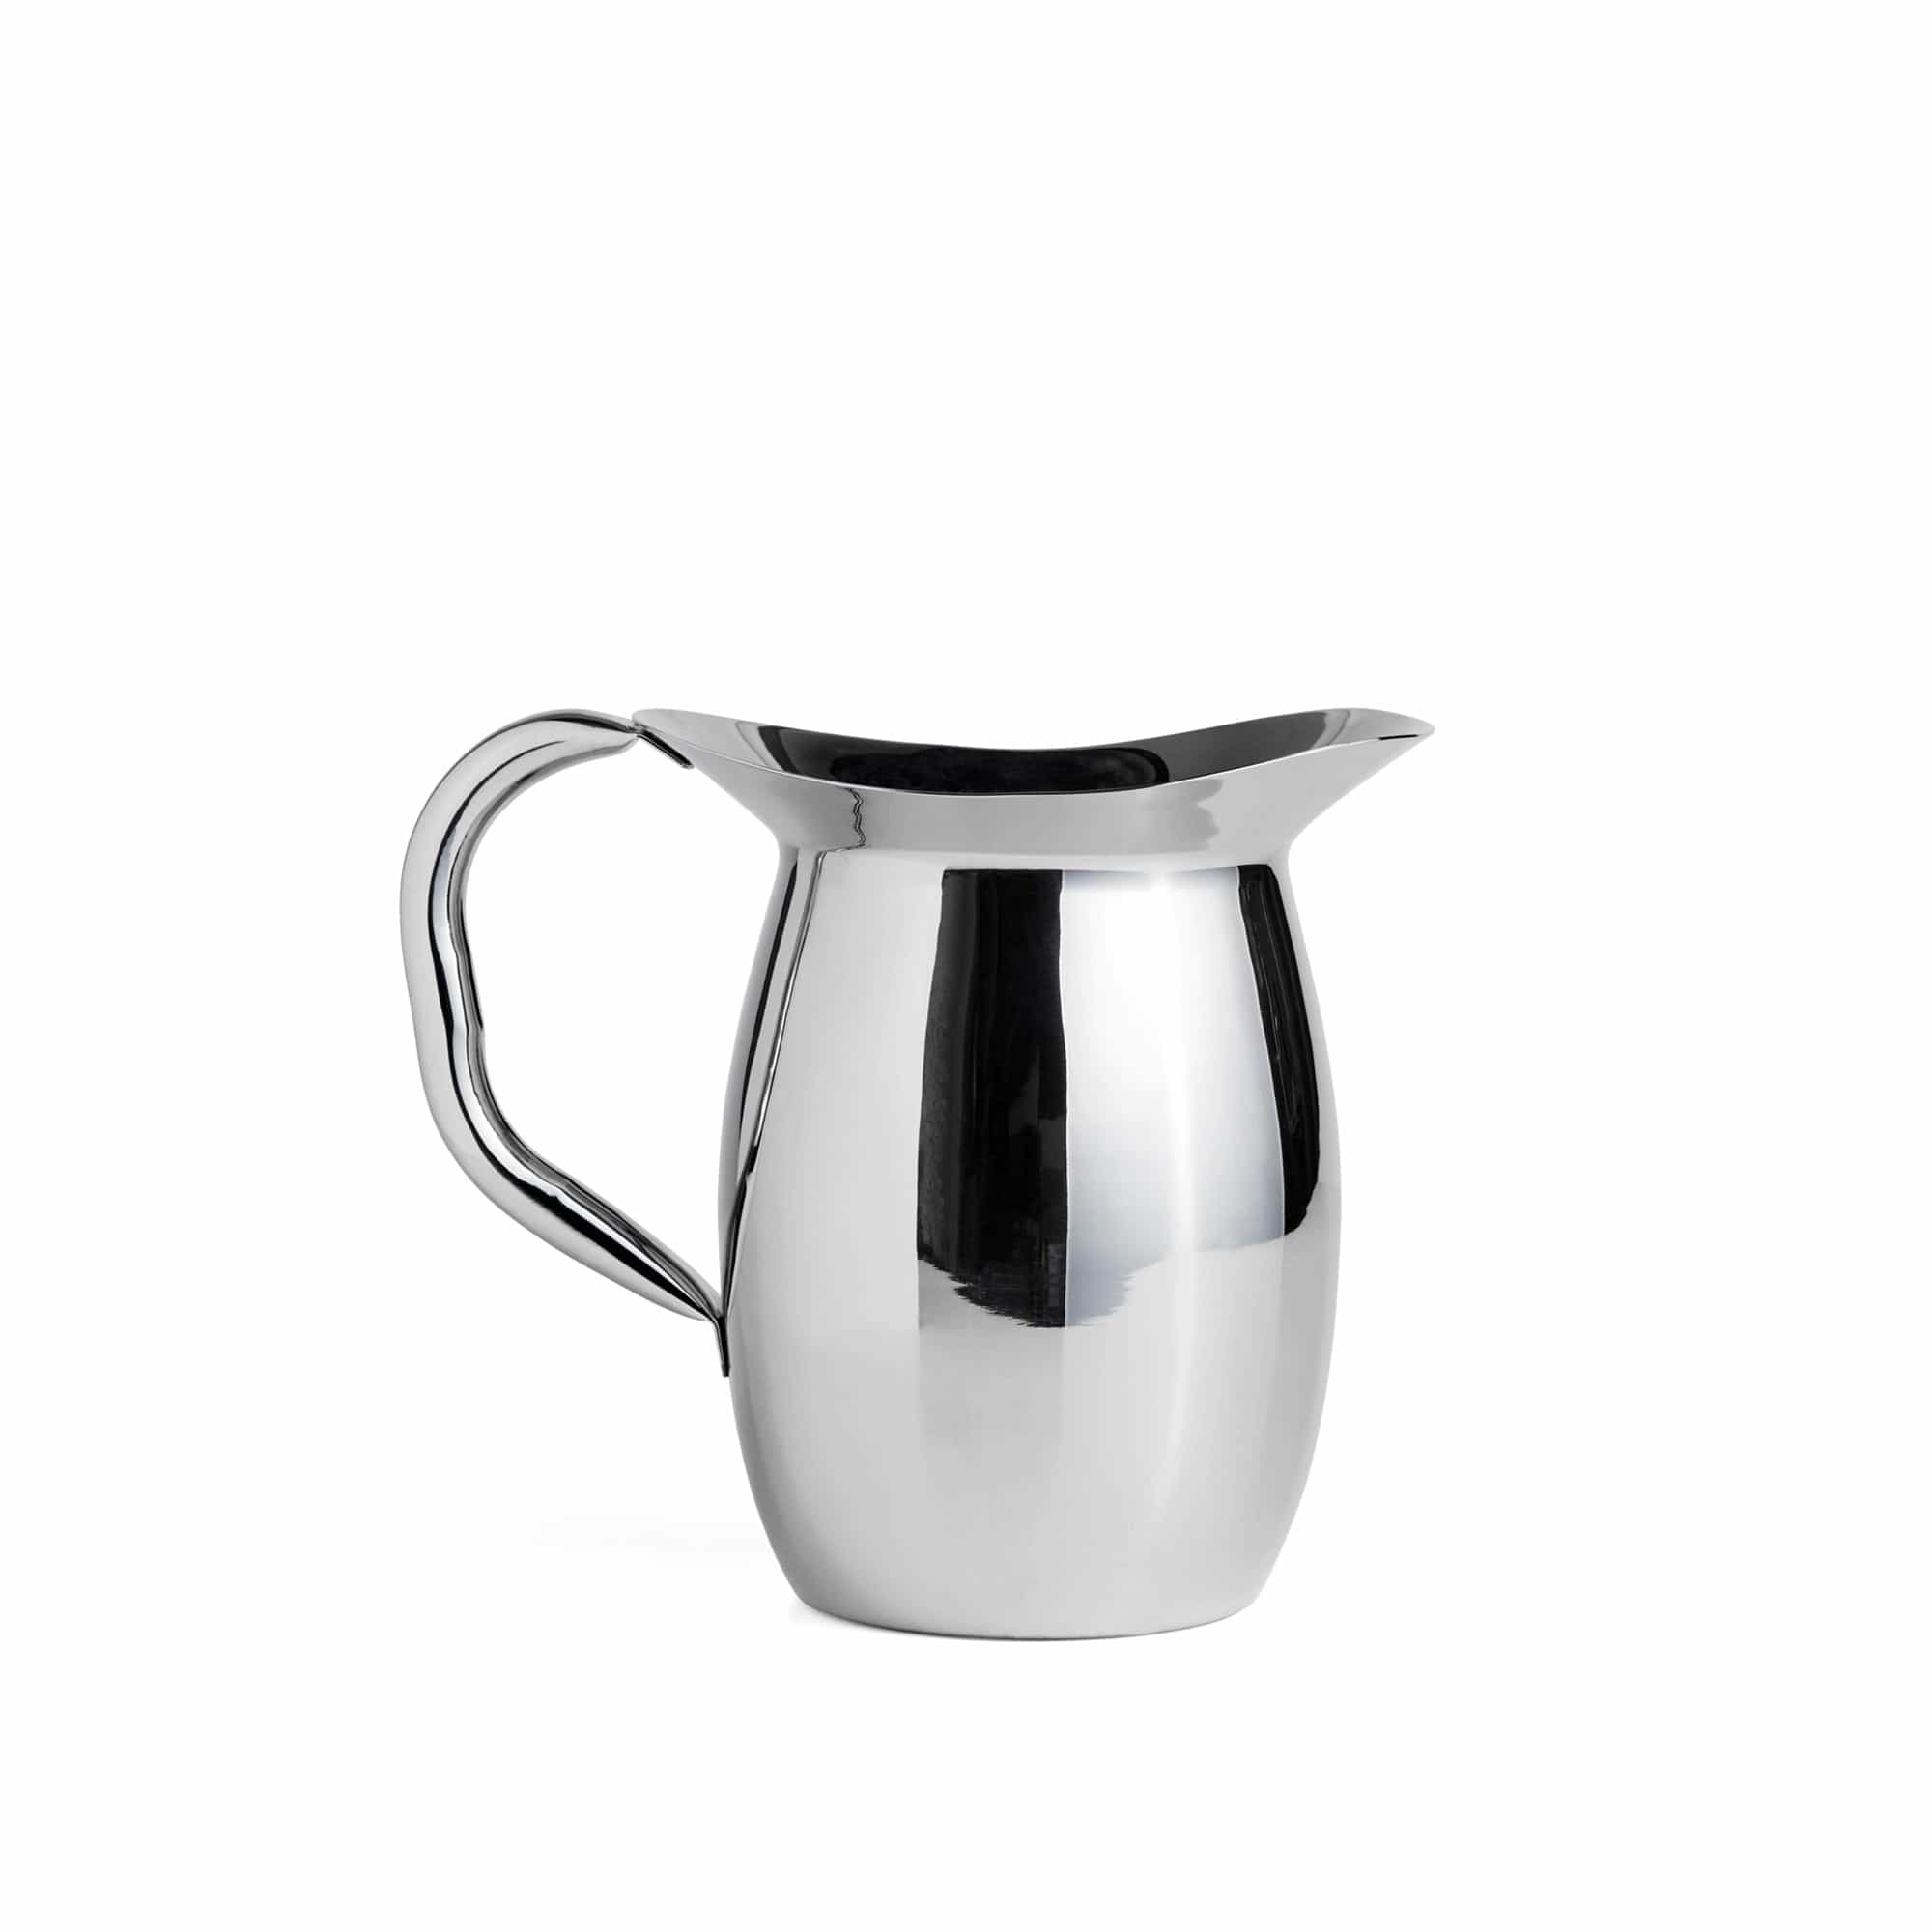 Indian Steel Pitcher